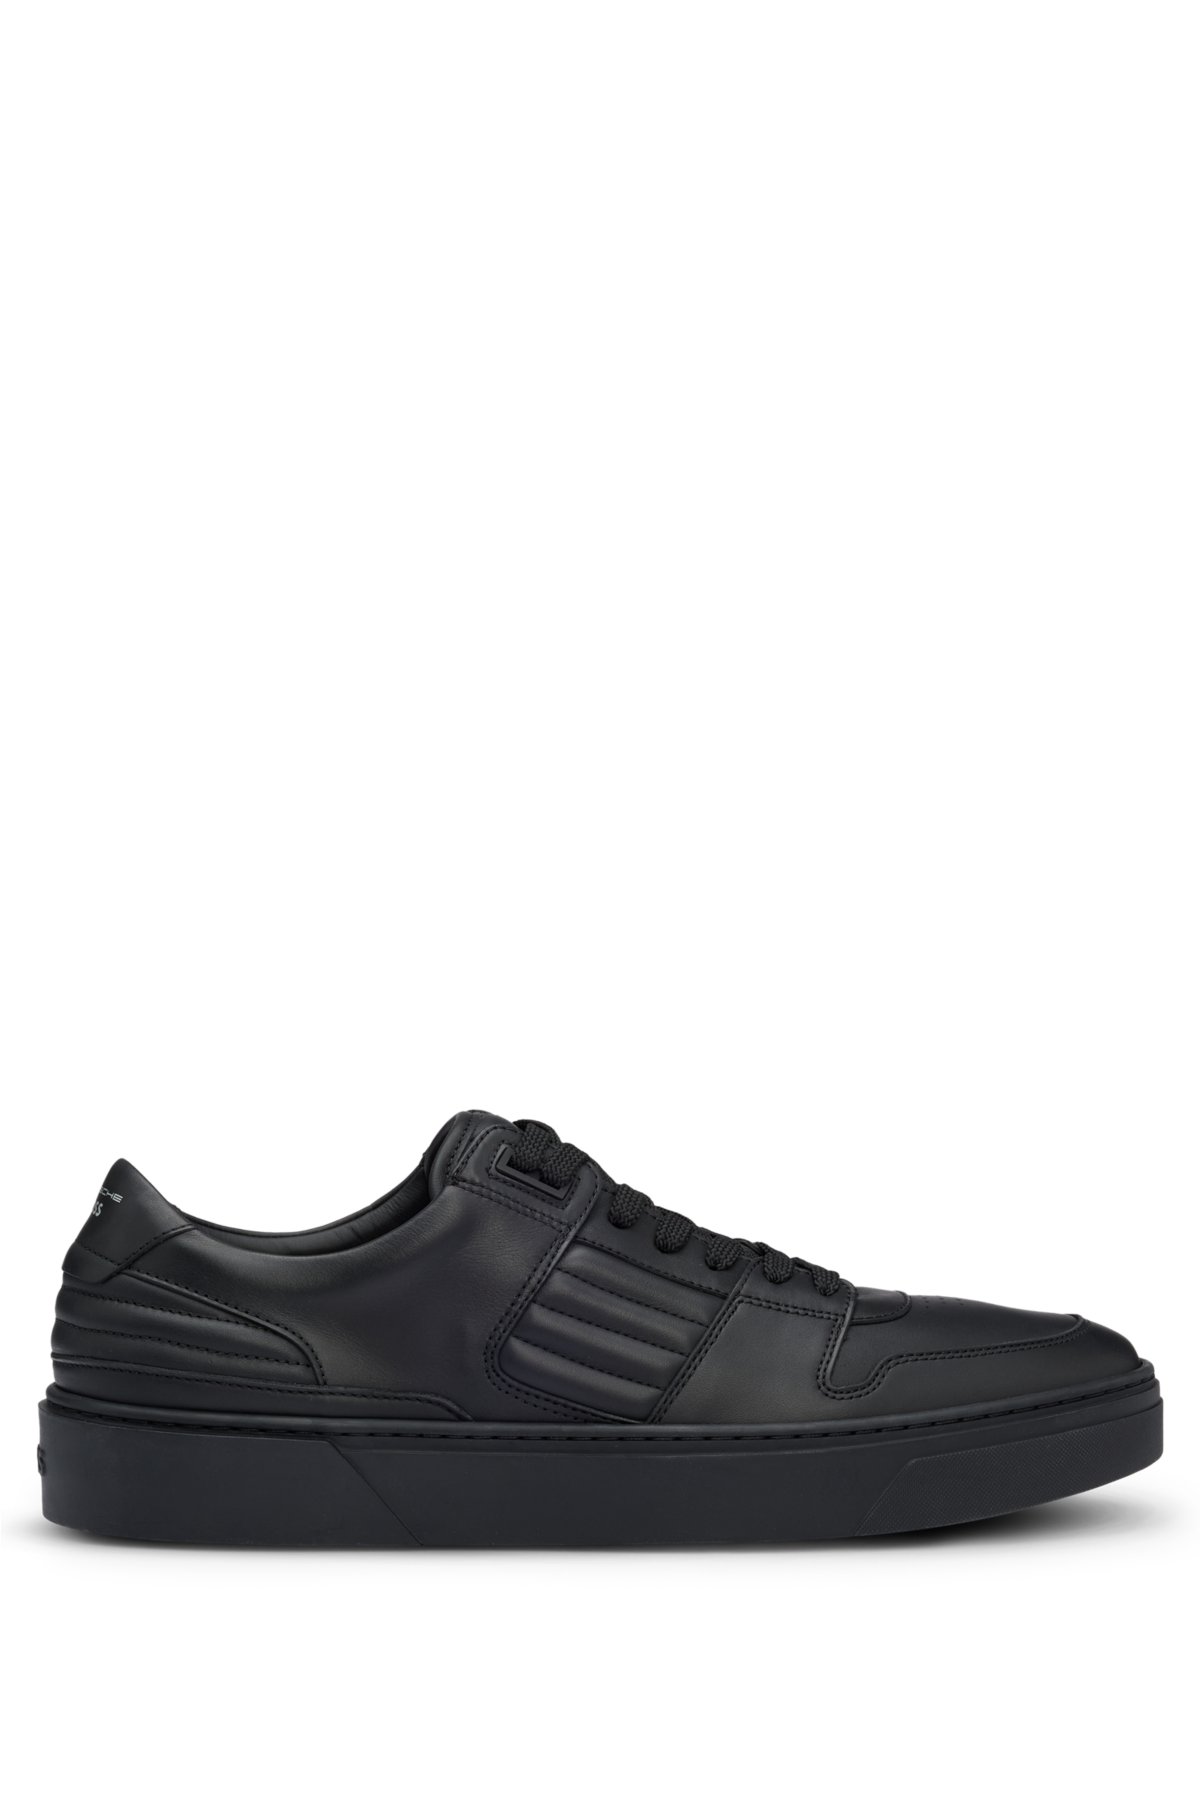 Porsche x BOSS leather trainers with padded details, Black